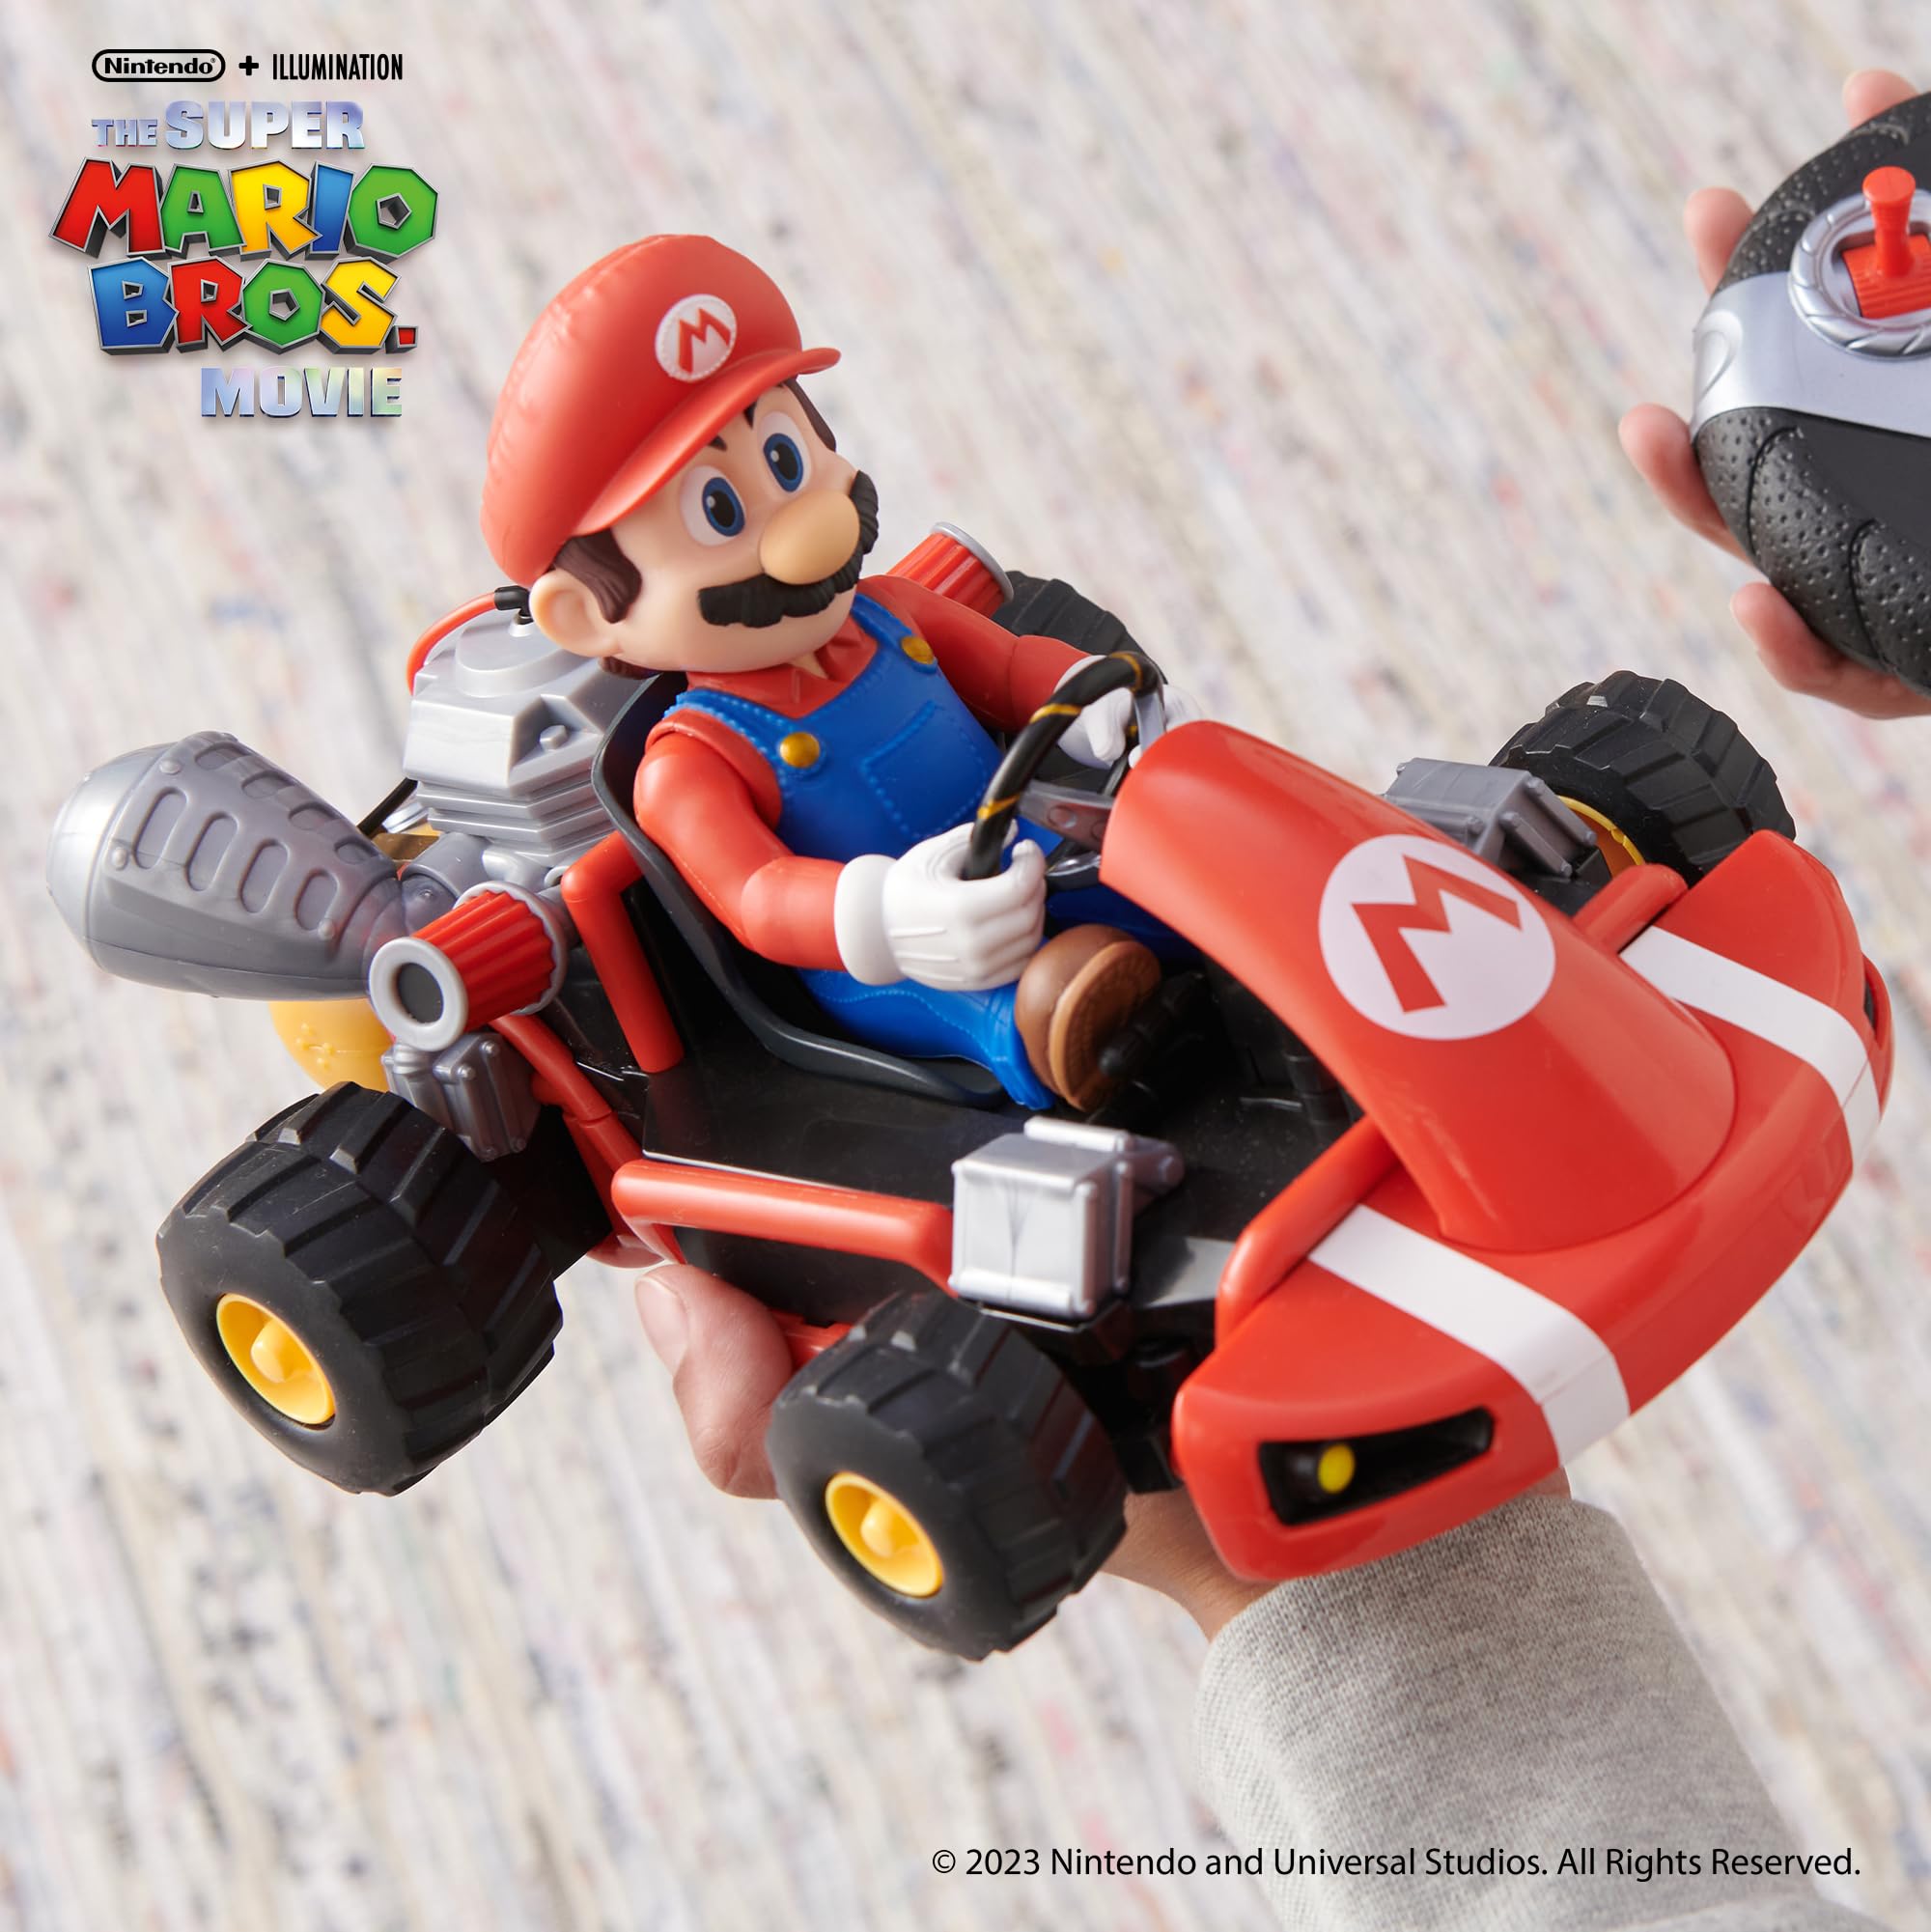 Nintendo Mario Rumble Kart RC Racer 2.4Ghz, with full function steering create 360 spins, whiles and drift! - Up to 100 ft. Range - For Kids ages 4+